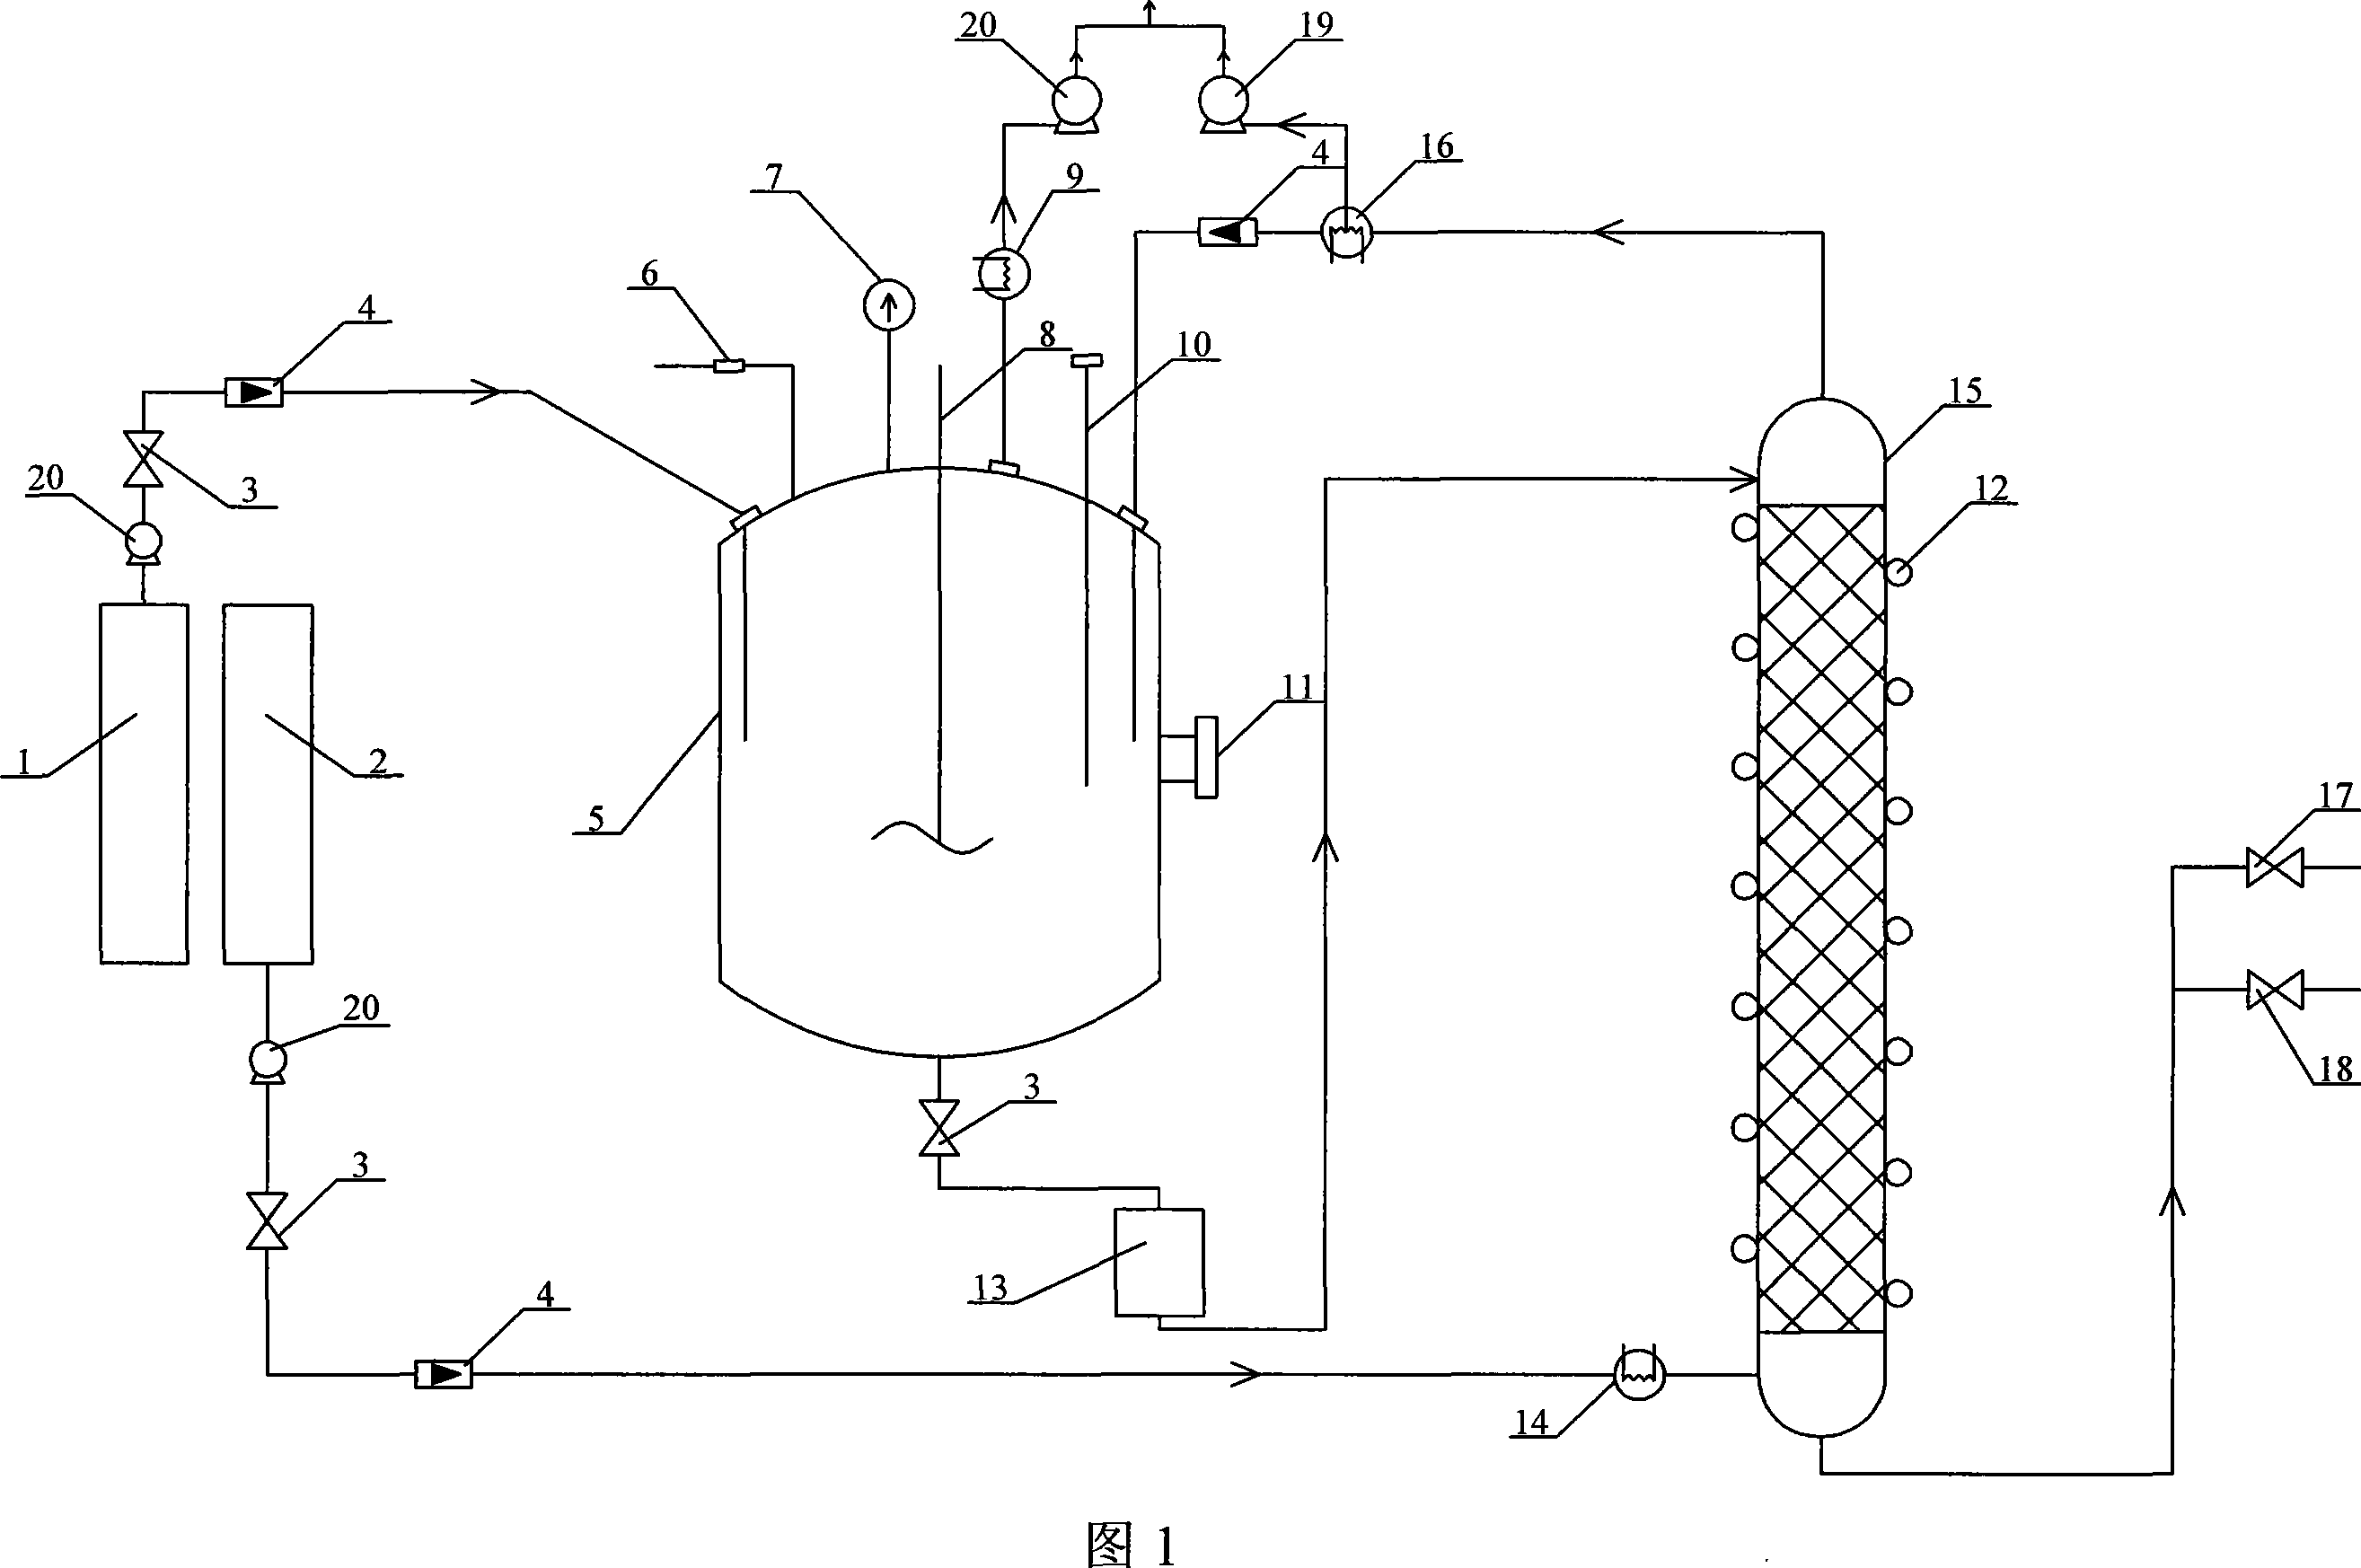 Reaction system and synthetic method for producing chloropropyl triethoxy silicane continuously